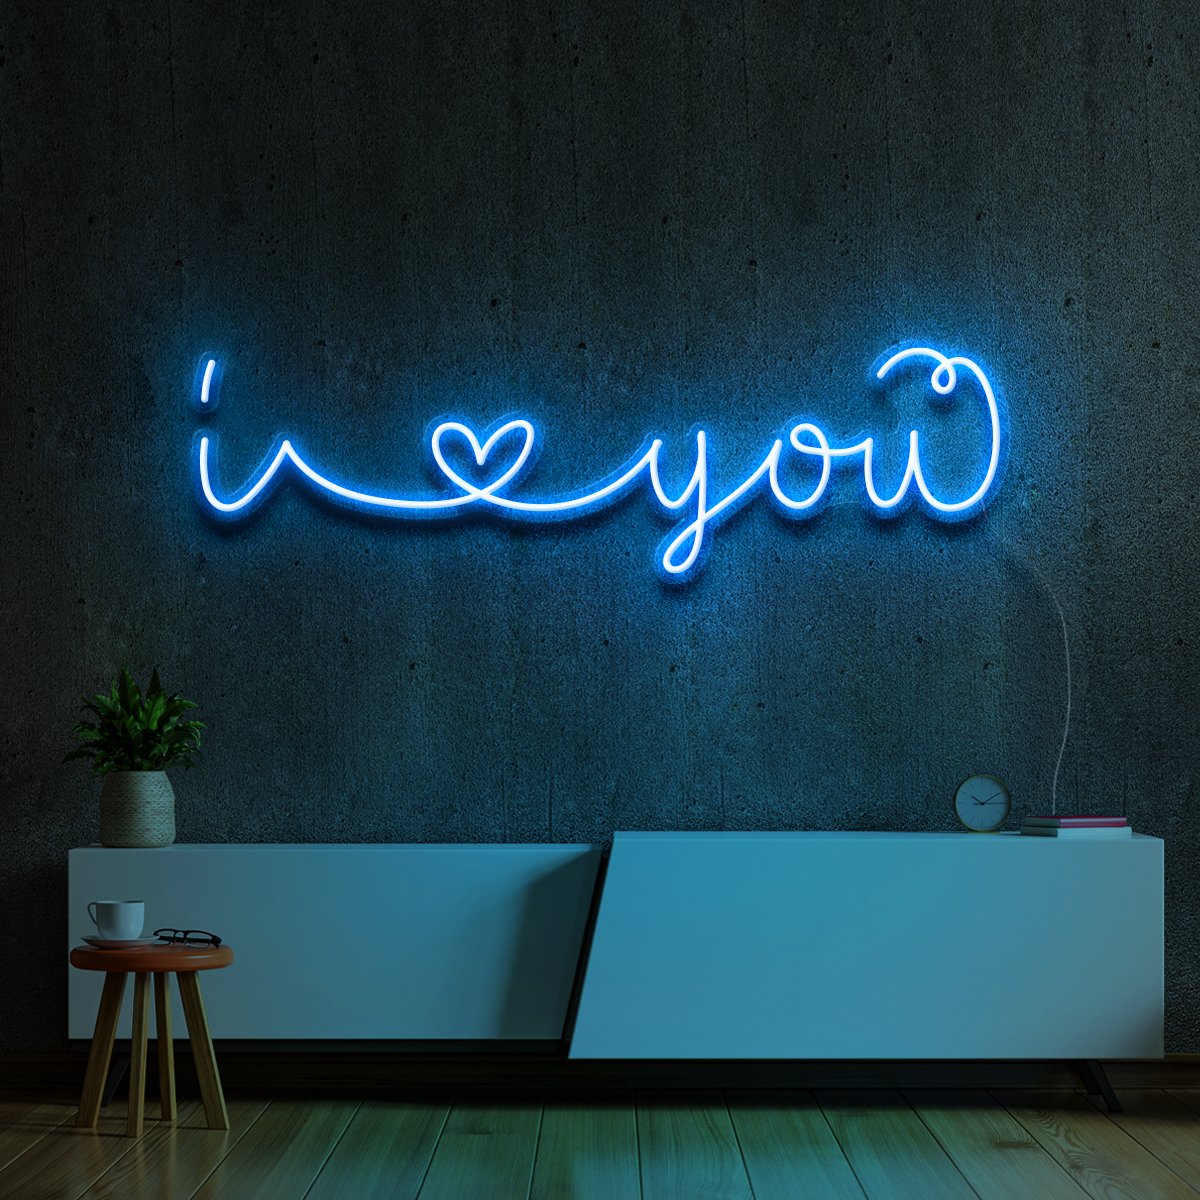 "I Love You" Neon Sign 60cm (2ft) / Ice Blue / LED Neon by Neon Icons